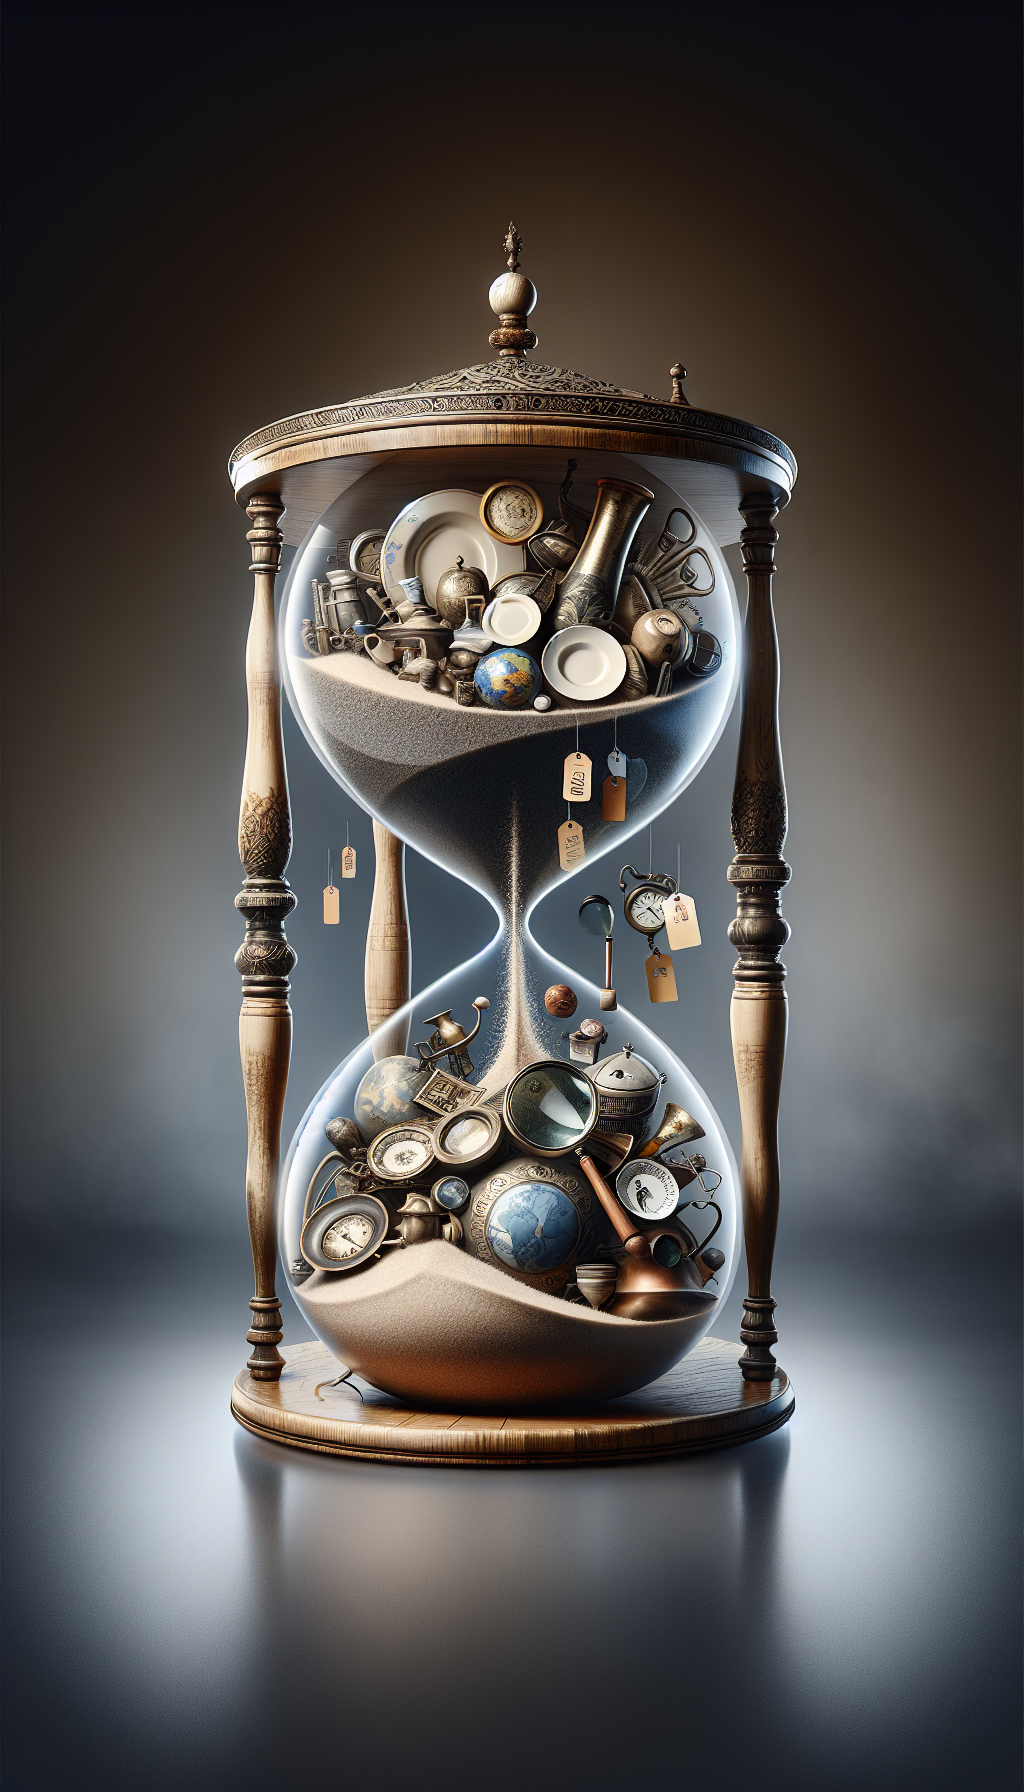 An intricate hourglass stands center, its upper globe cradling an assortment of antique dishes rather than sand, while its lower globe showcases price tags and magnifying glasses in place of usual grains. This surreal blend symbolizes the passage of time and the value assessment in the era exploration of antiques.